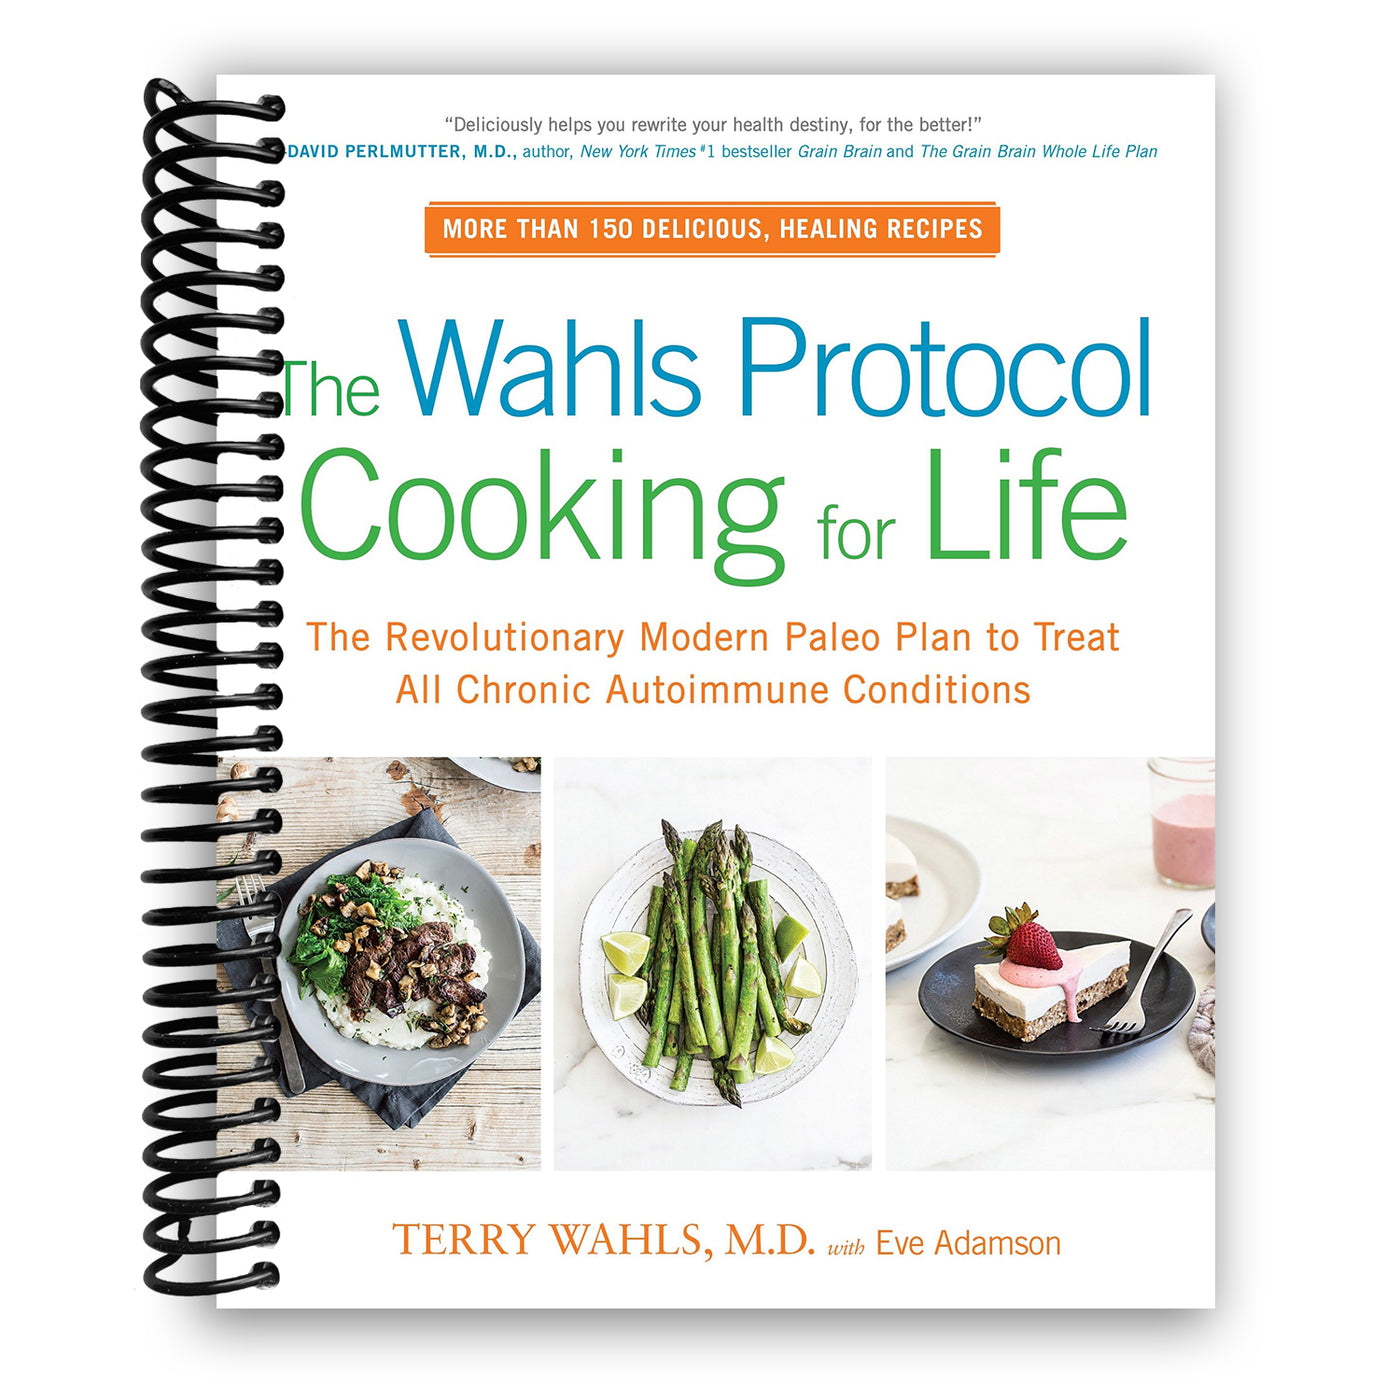 The Wahl's Protocol Cooking for Life: The Revolutionary Modern Paleo Plan to Treat All Chronic Autoimmune Conditions (Spiral Bound)